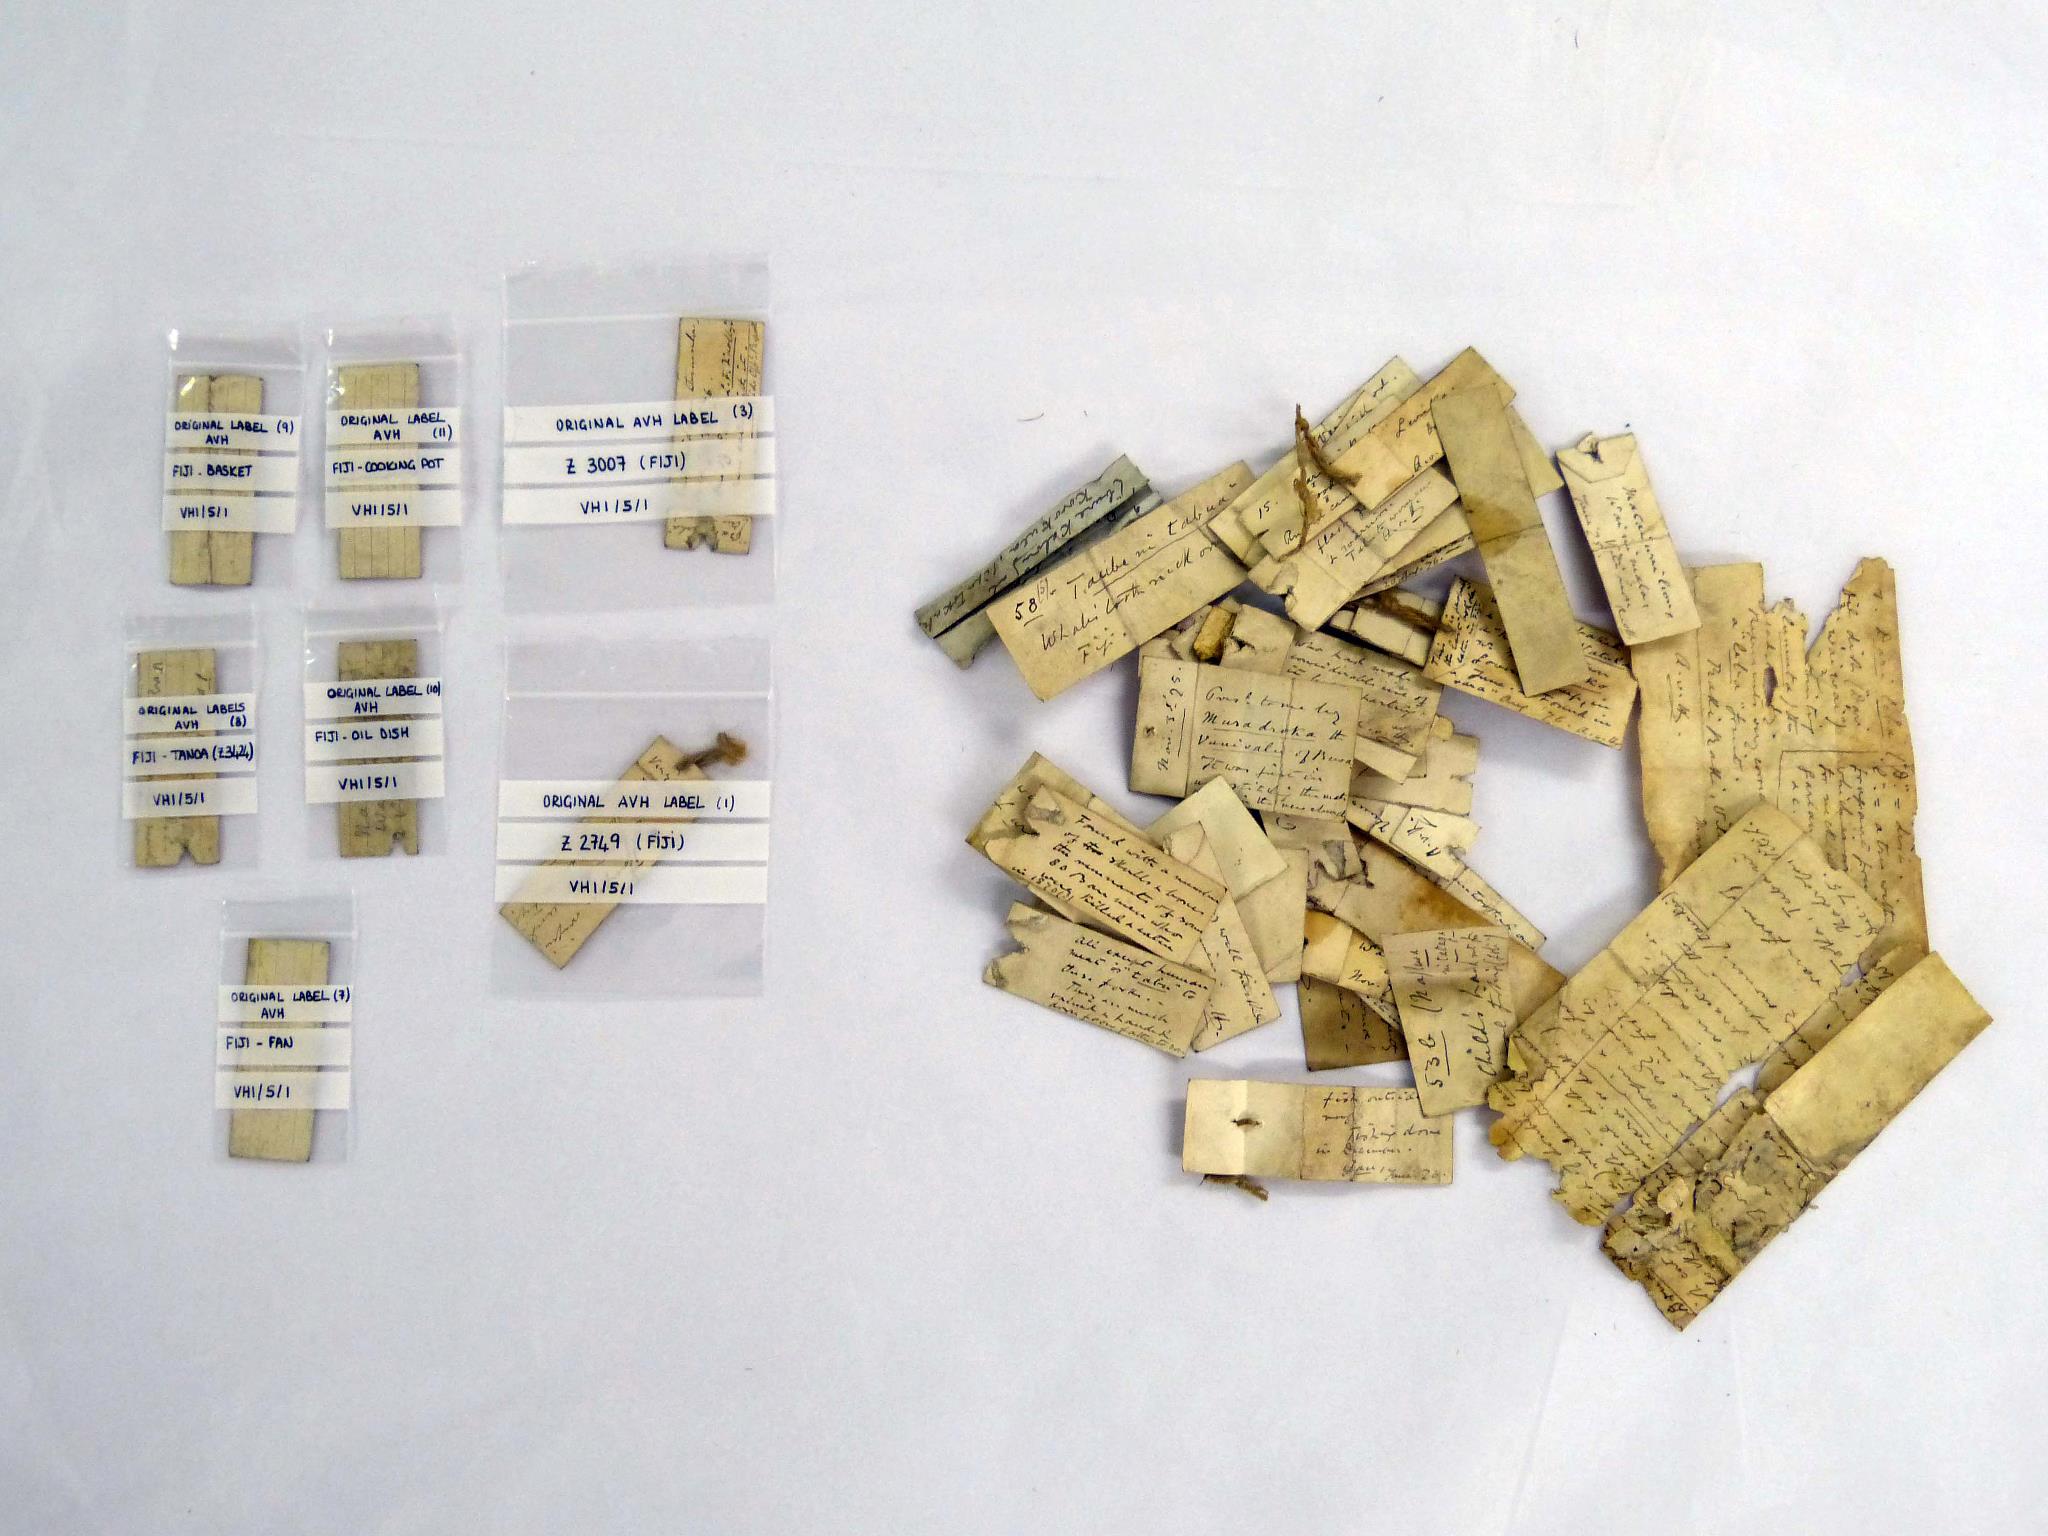 Original AVH labels for objects from Fiji